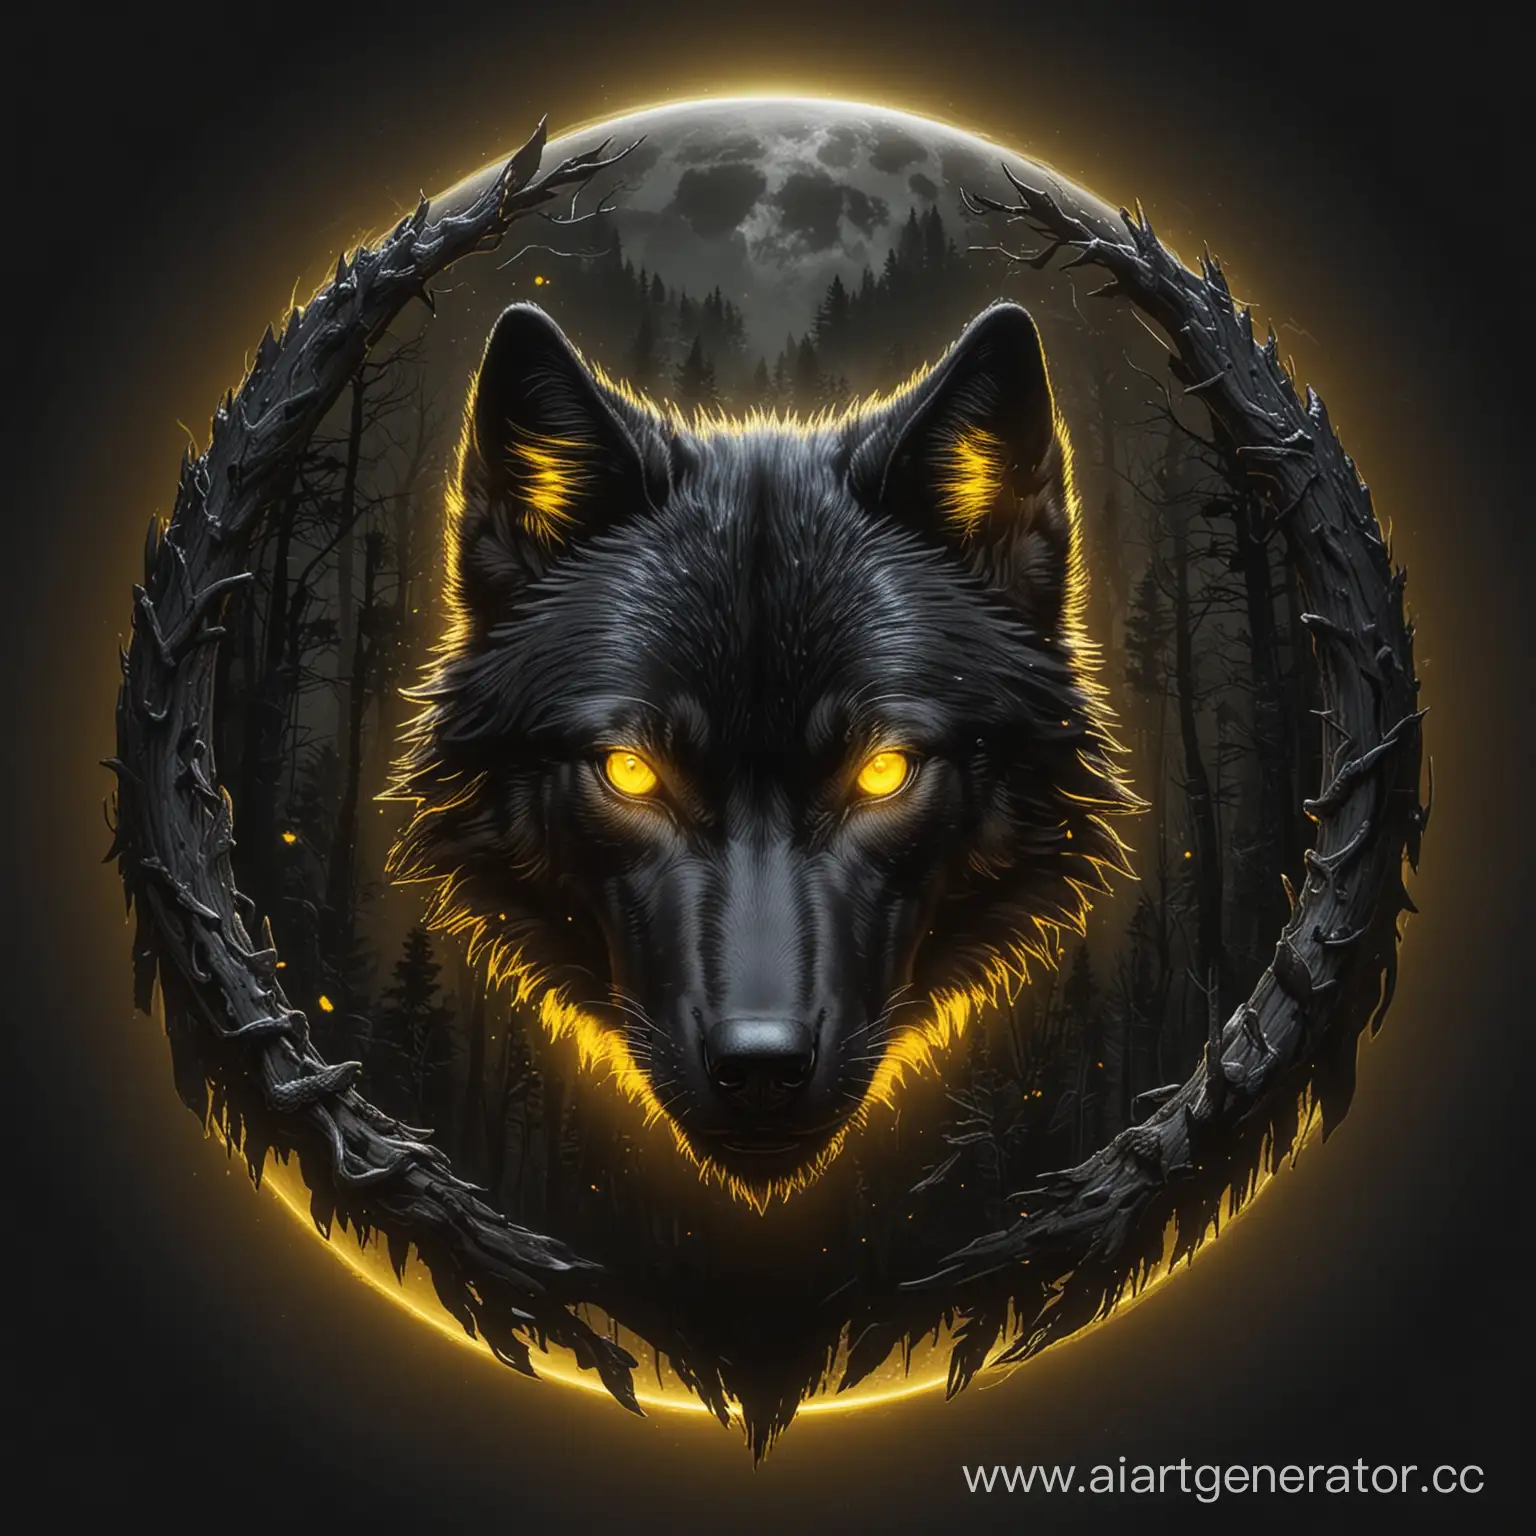 A logo black wolf with glowing yellow eyes is featured in the center without background